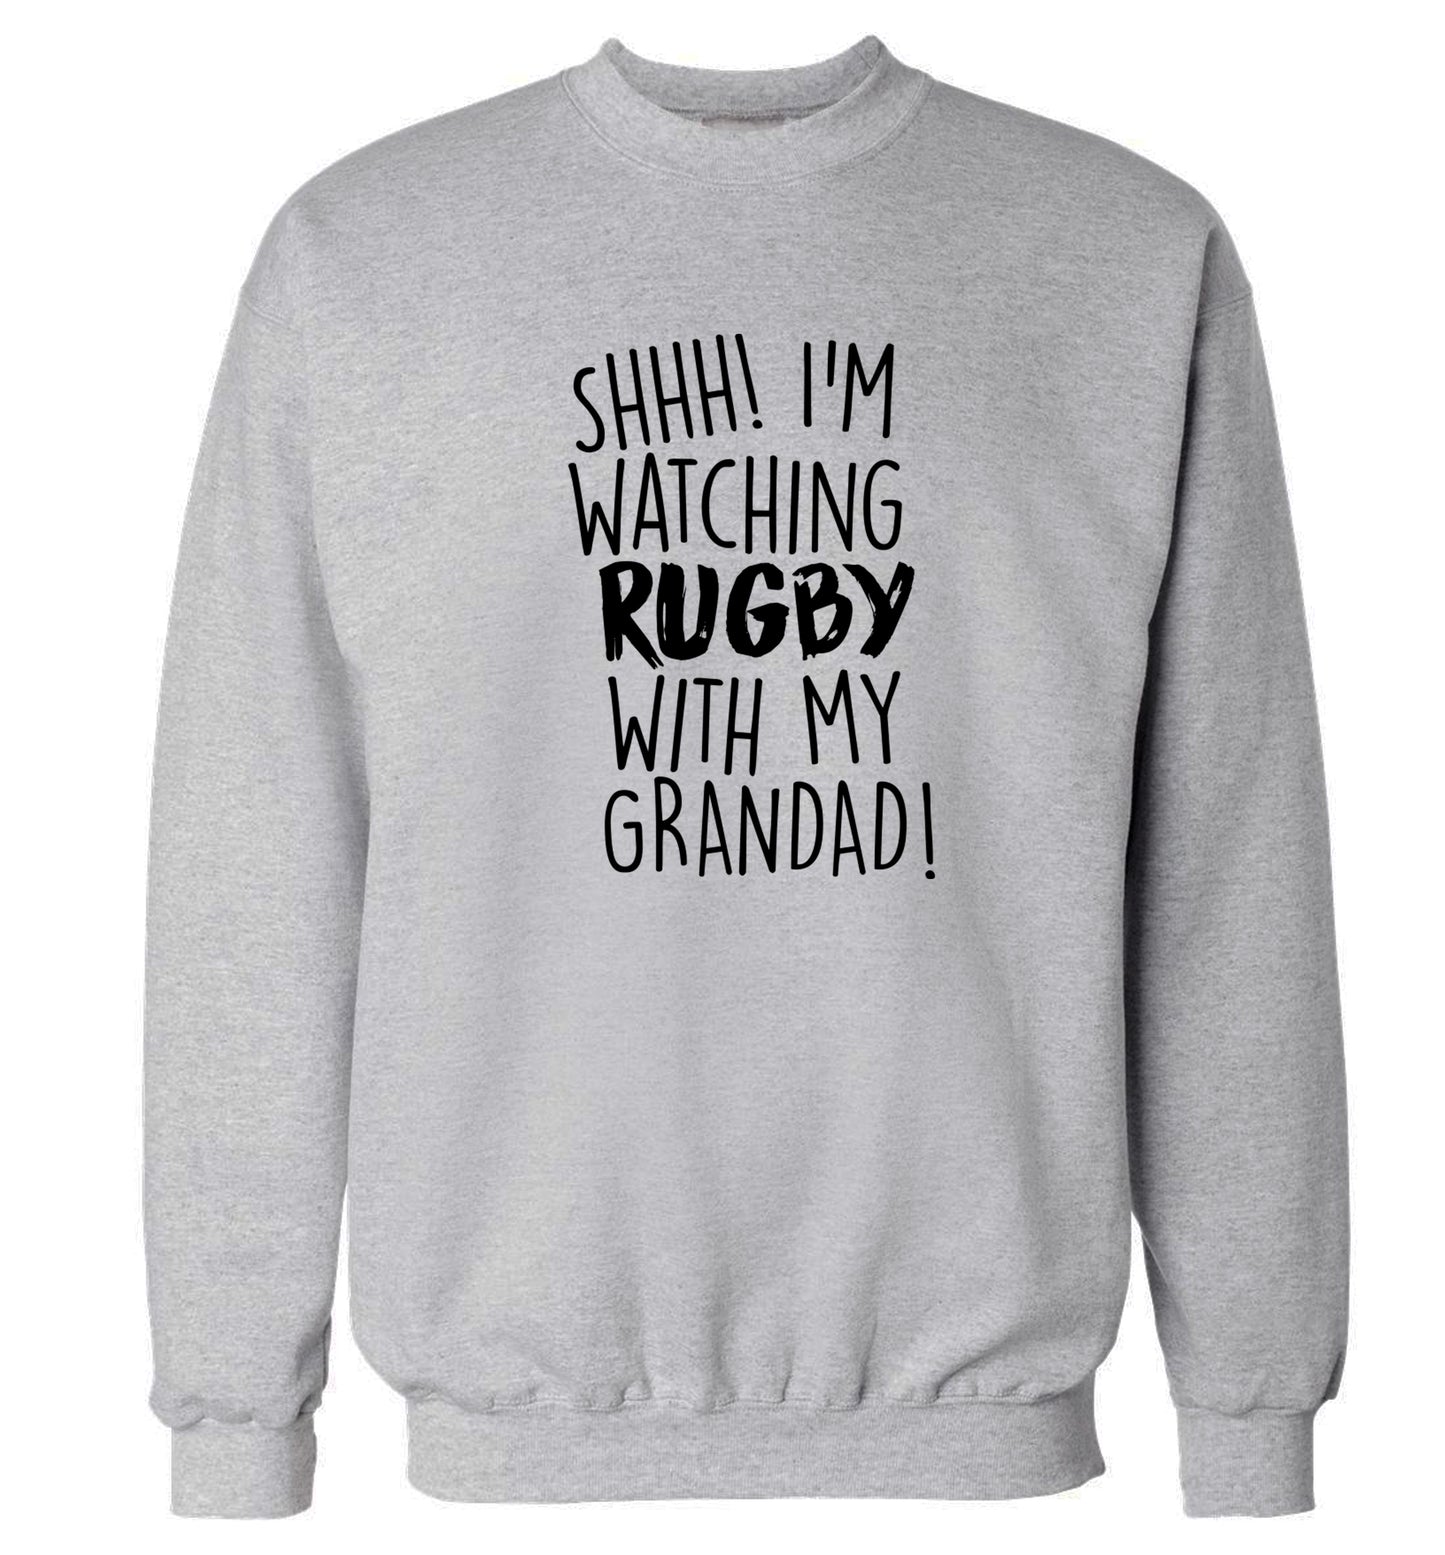 Shh I'm watching rugby with my grandad Adult's unisex grey Sweater 2XL